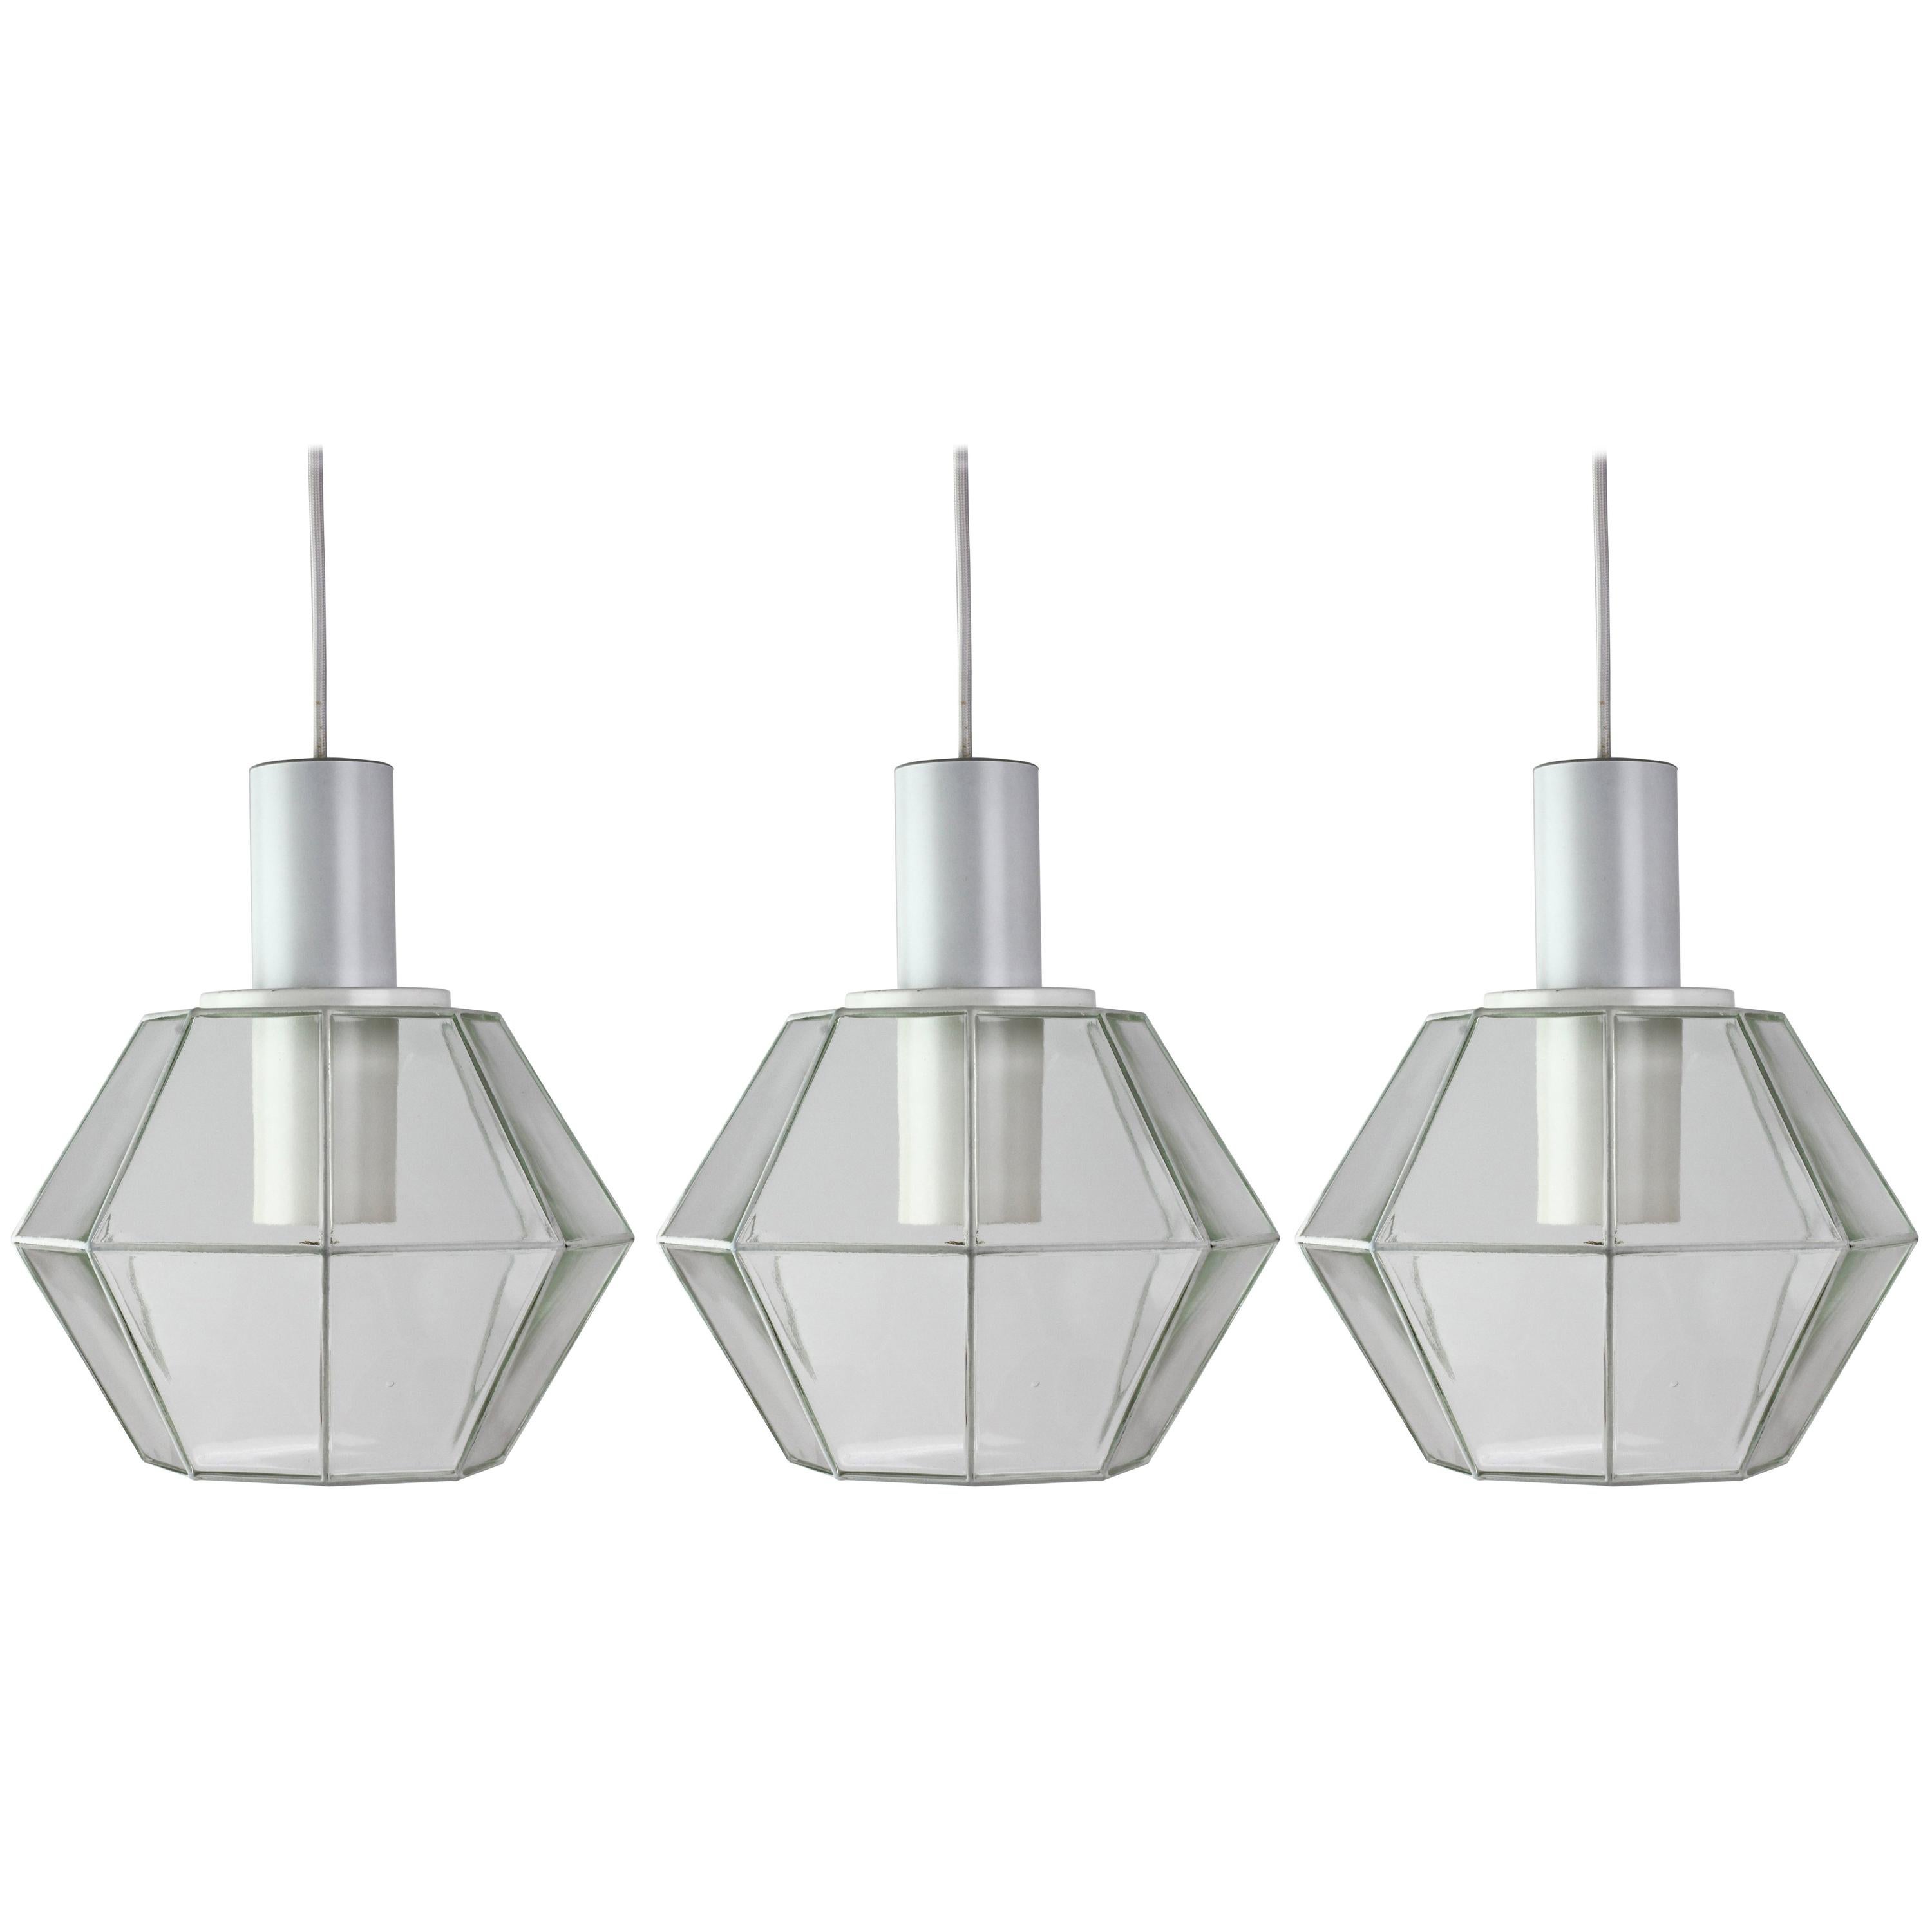 Limburg 1 of 4 Vintage 1970s Geometric White & Clear Glass Pendant Lights Lamps For Sale